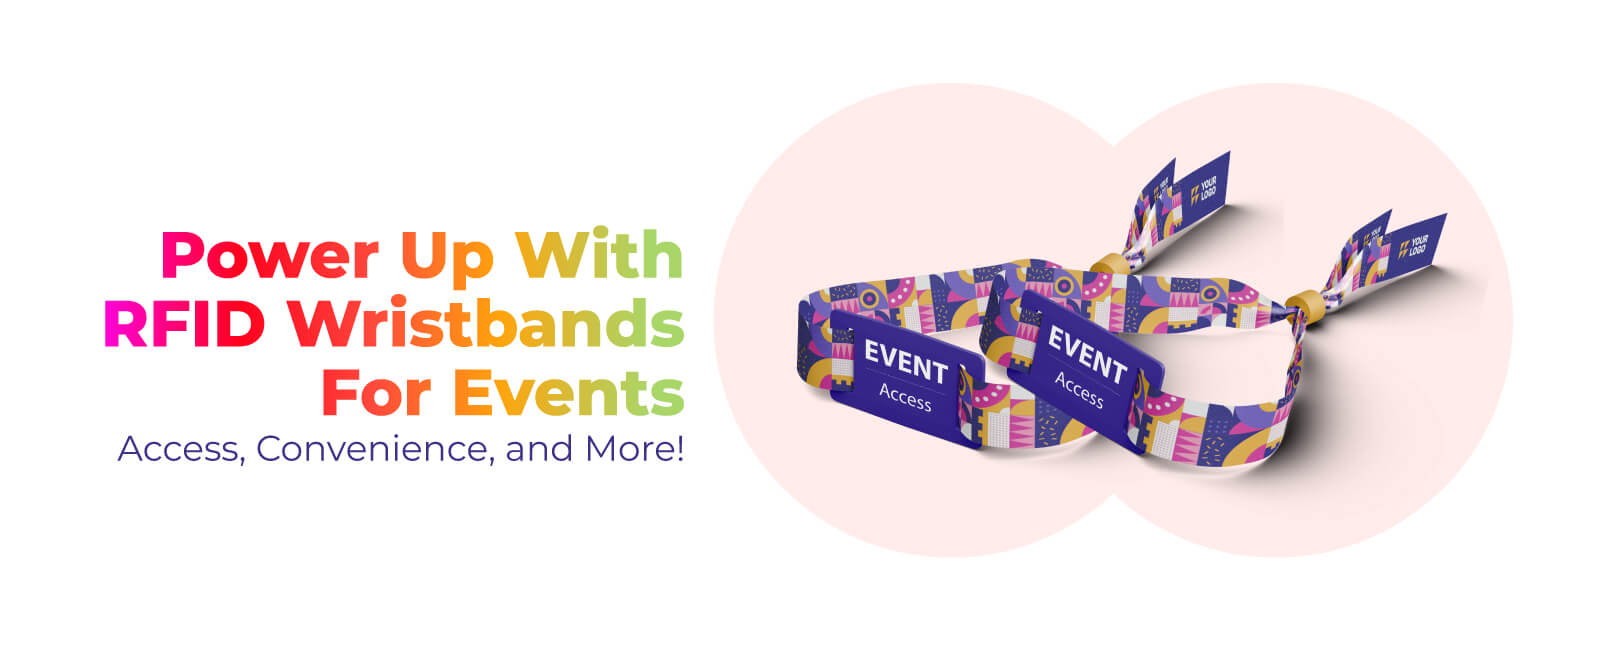 Power Up With RFID Wristbands For Events: Access, Convenience, and More!